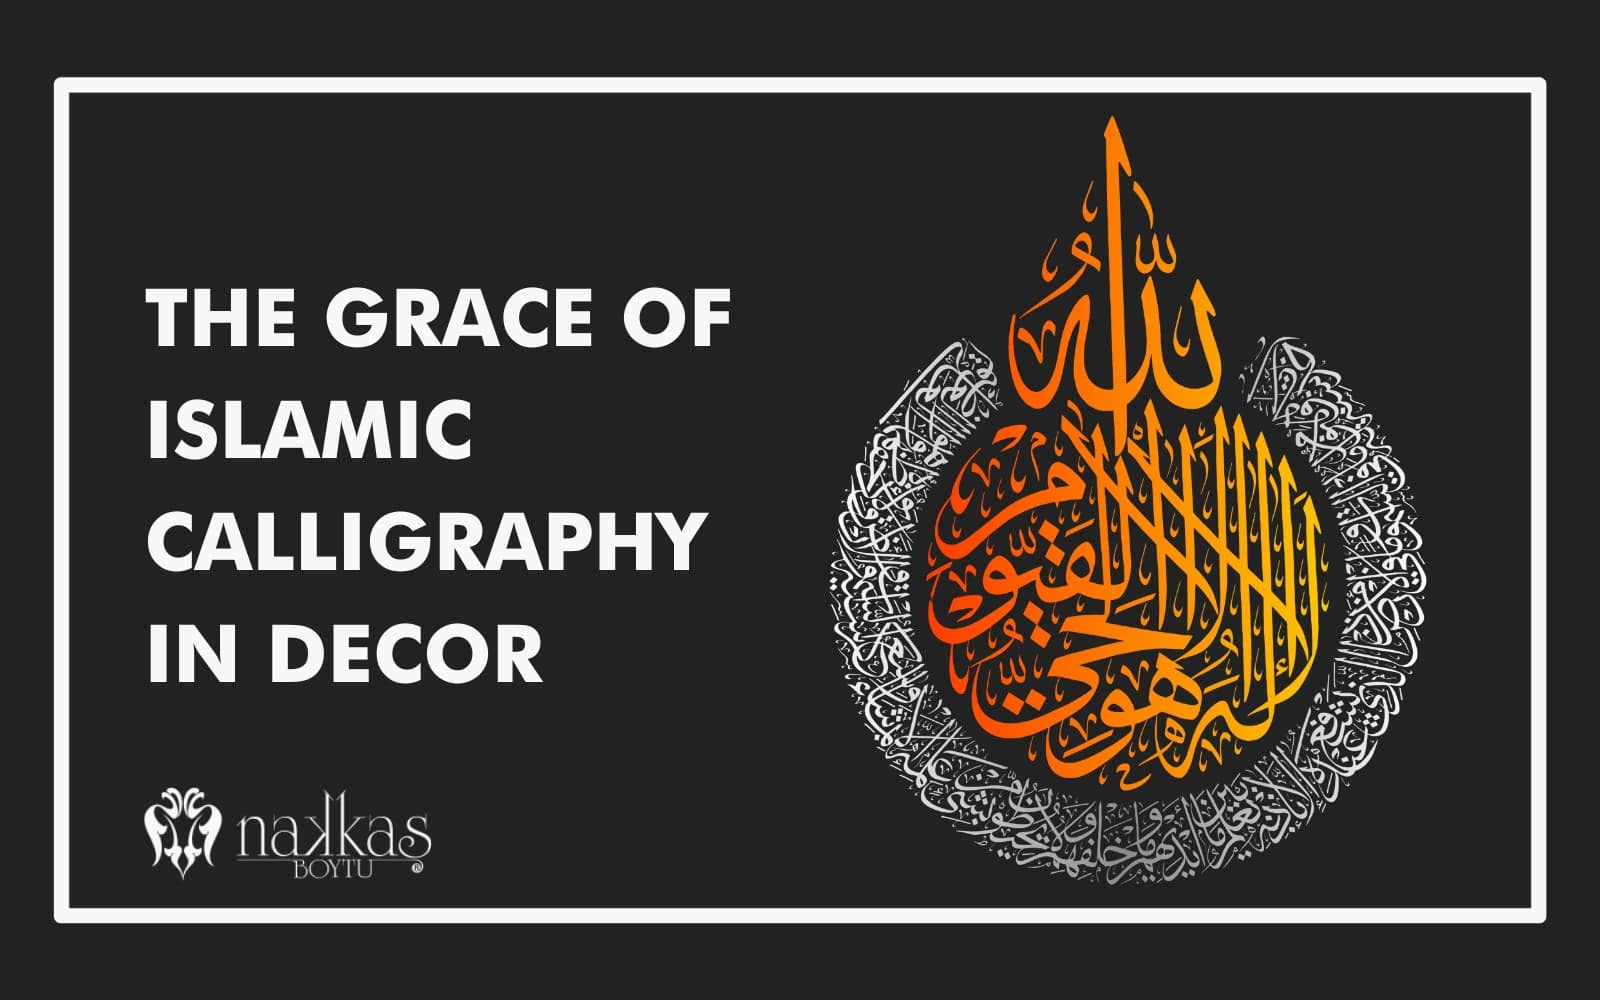 The Grace of Islamic Calligraphy in Decor